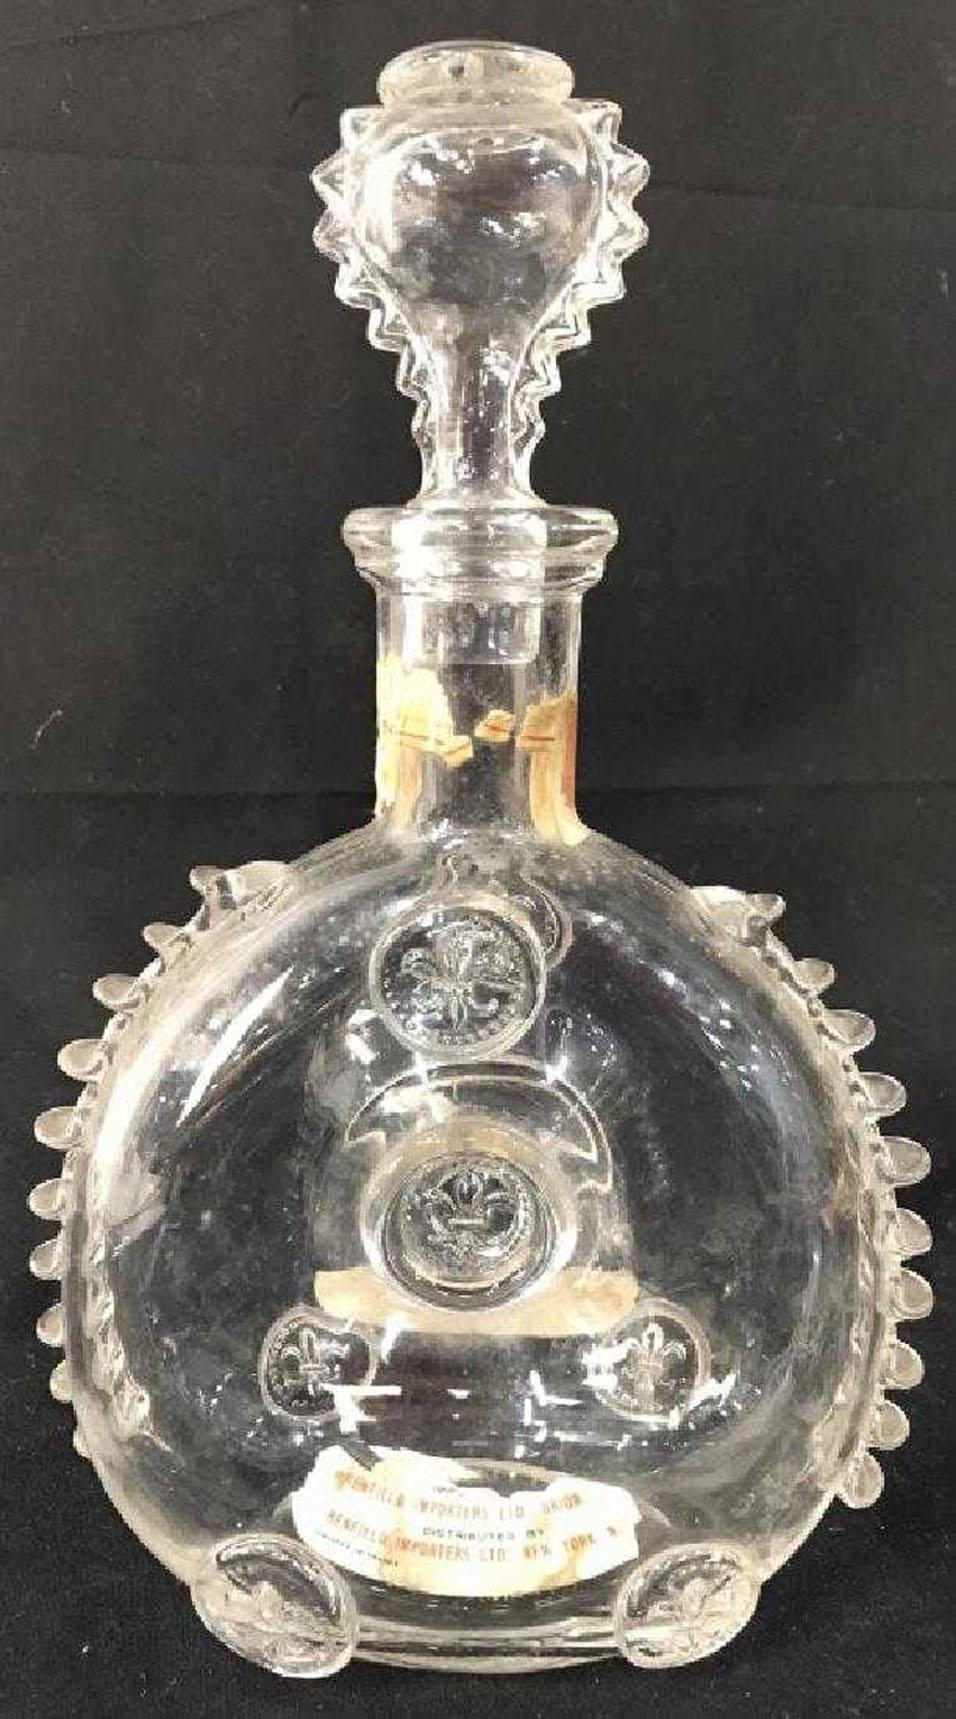 Vintage Baccarat Remy Martin Louis XIII crystal decanter bottle with stopper, decorated with fleur-de-lis medallions and ruffled edges or spiny trim. Designed to hold Grande Champagne Louis XIII cognac, the underside is acid-etched with the Baccarat